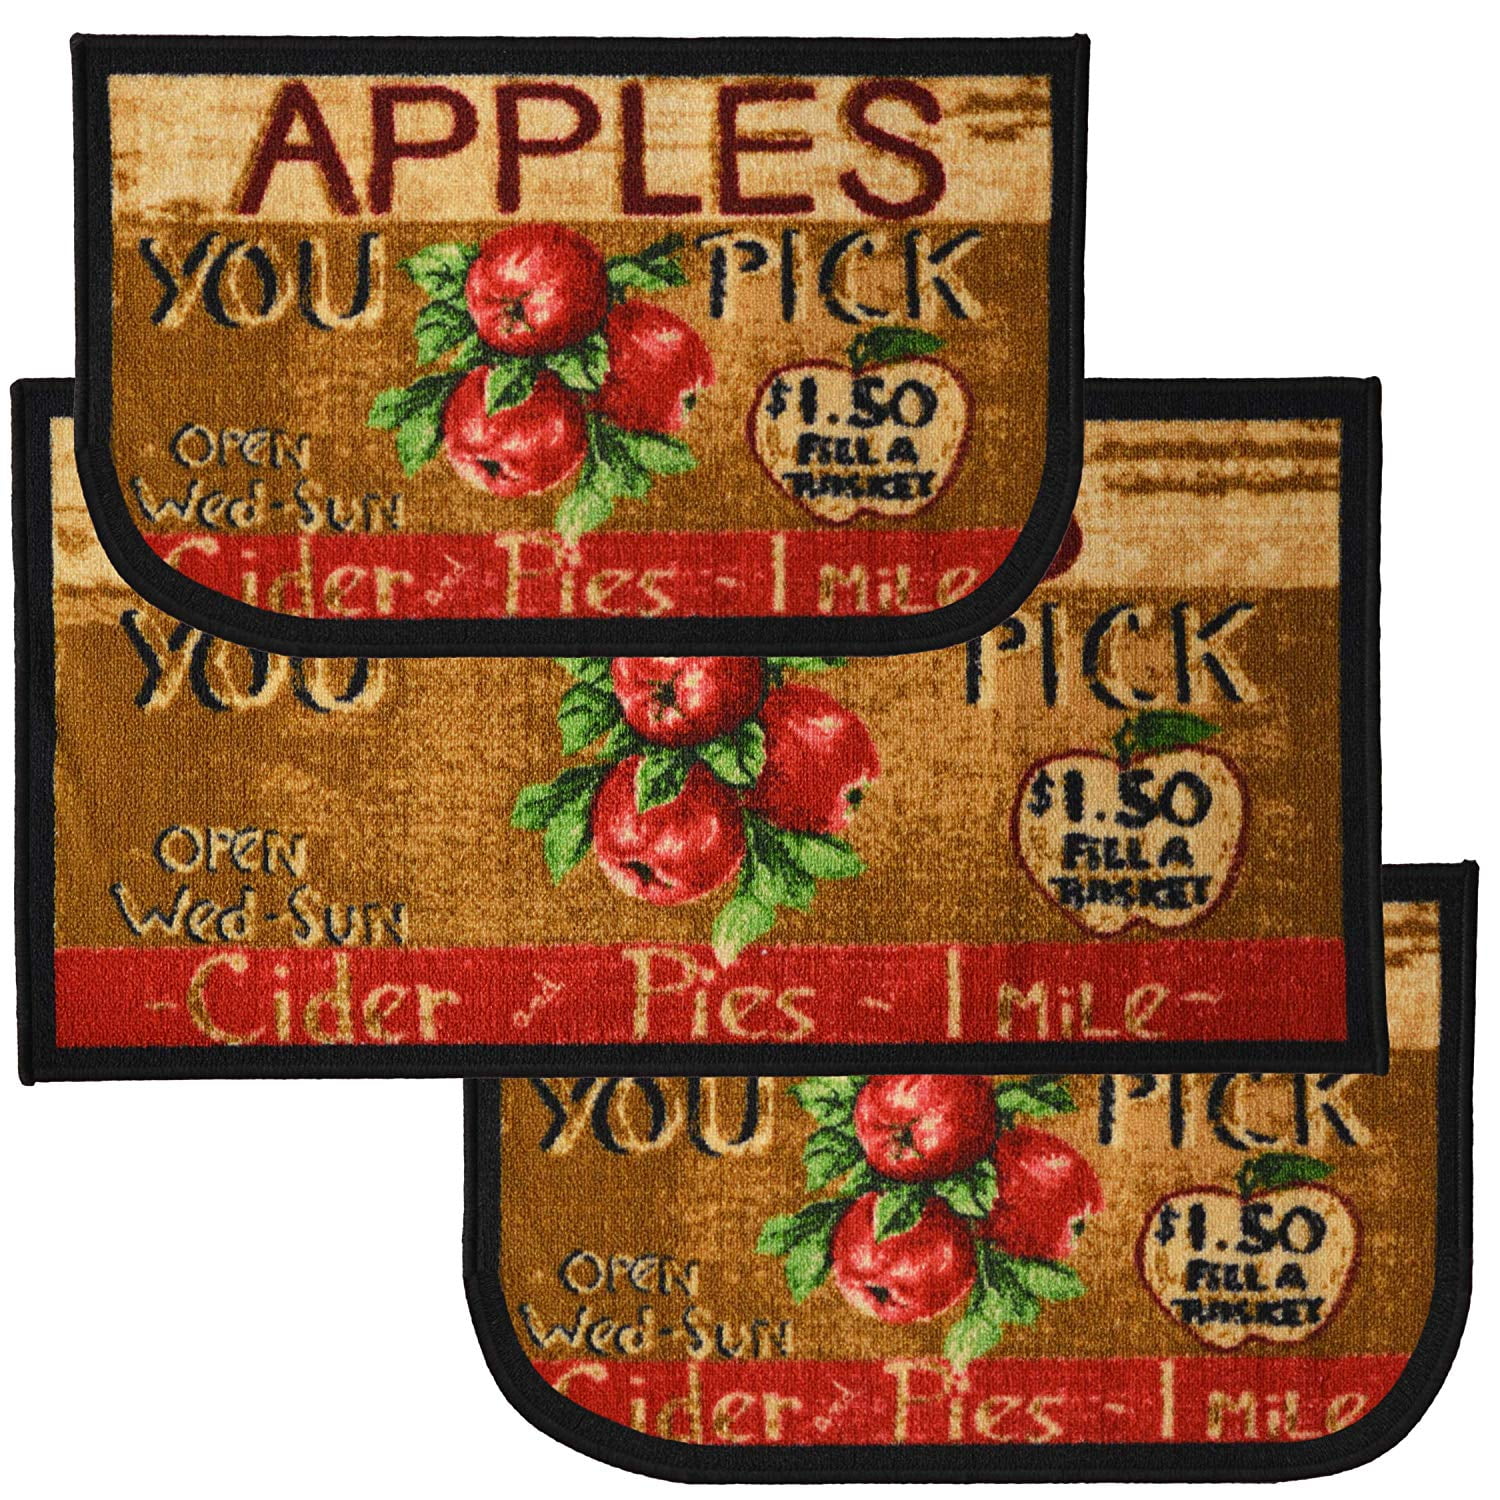 KH & SET OF 2 PRINTED KITCHEN NYLON RUGS 18" x 30" 20" x 40" RED APPLES 